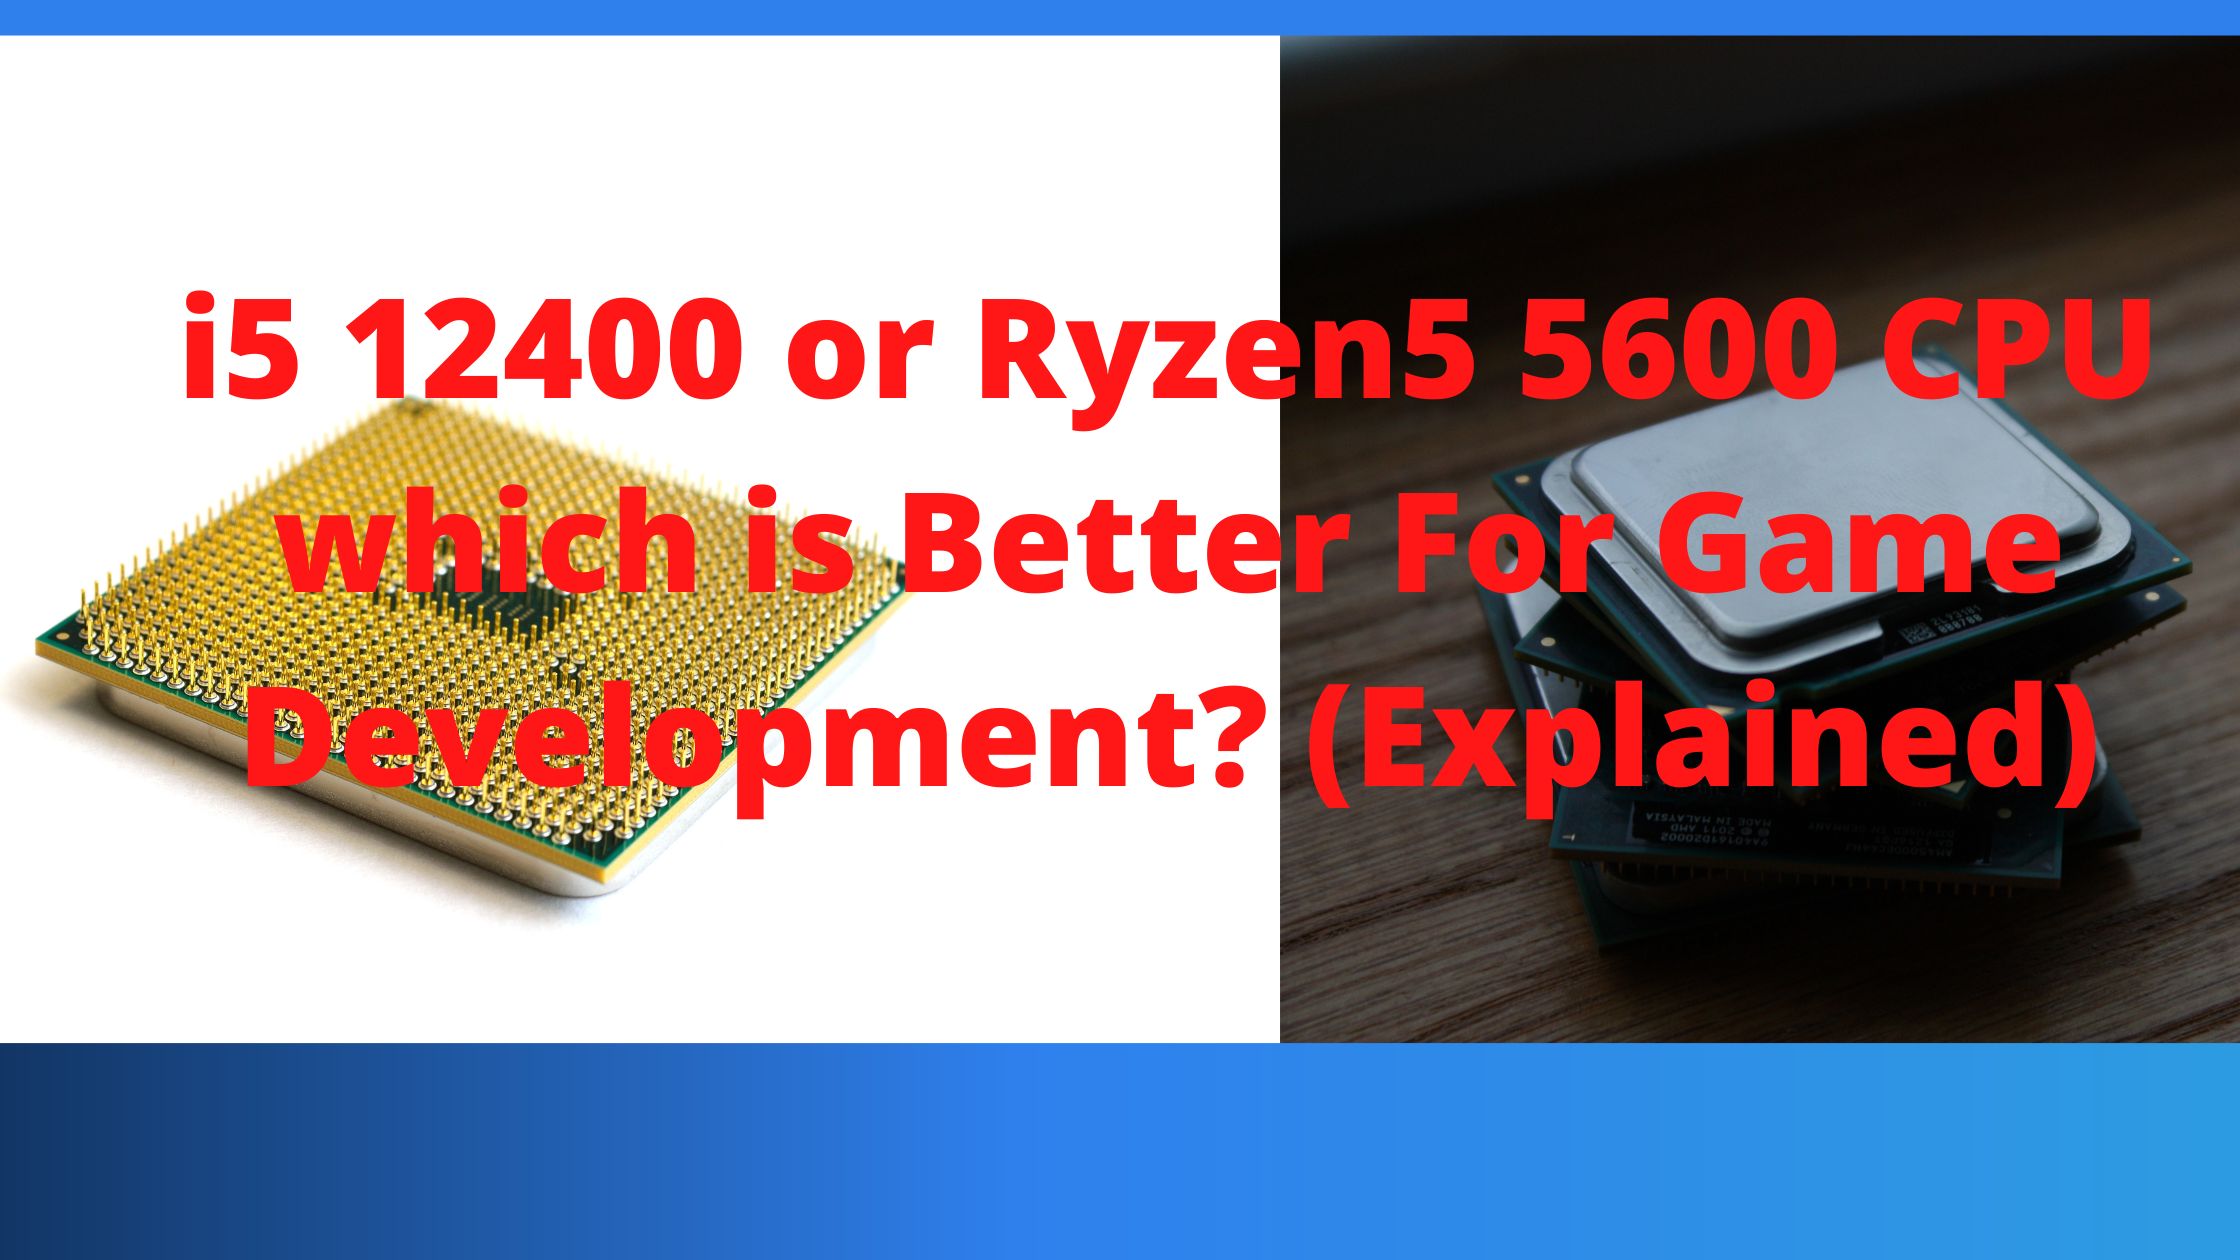 i5 12400 or Ryzen5 5600 CPU which is Better For Gaming and it Development? (Explained)